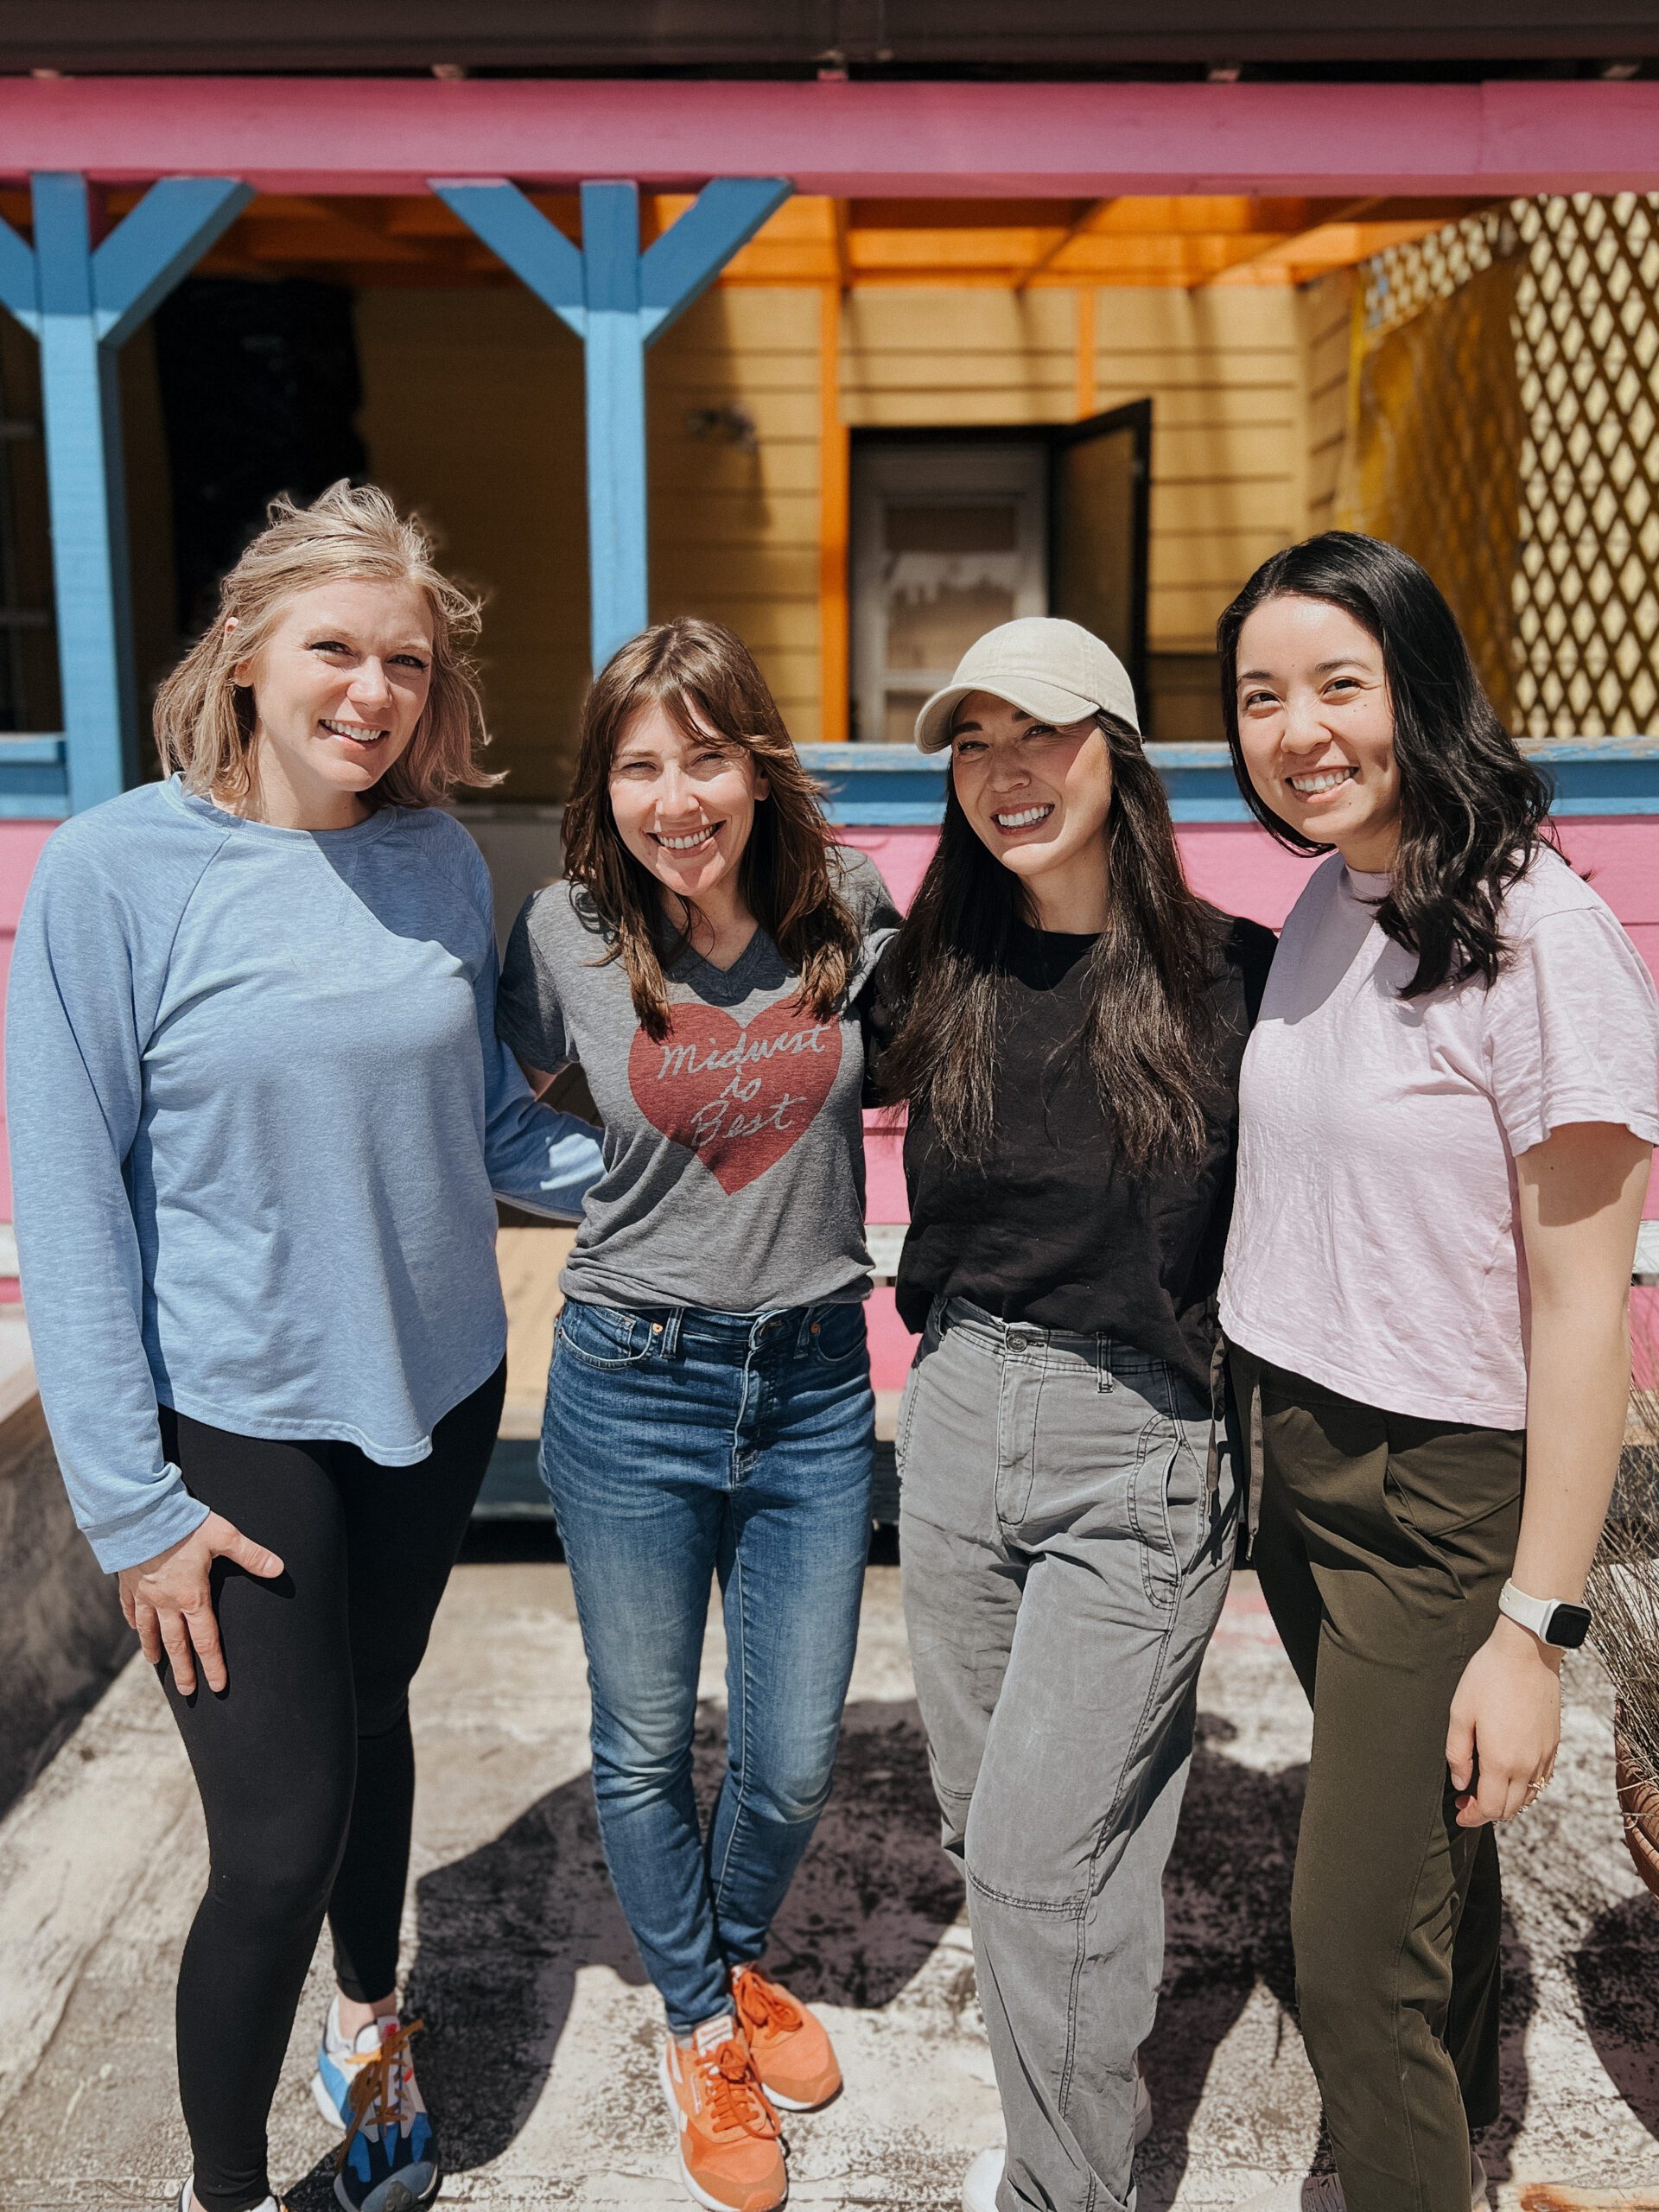 Our rockstar volunteer team! Katie, Jenny, Kim and Rachel. We couldn't have done it without them! // via Yellow Brick Home